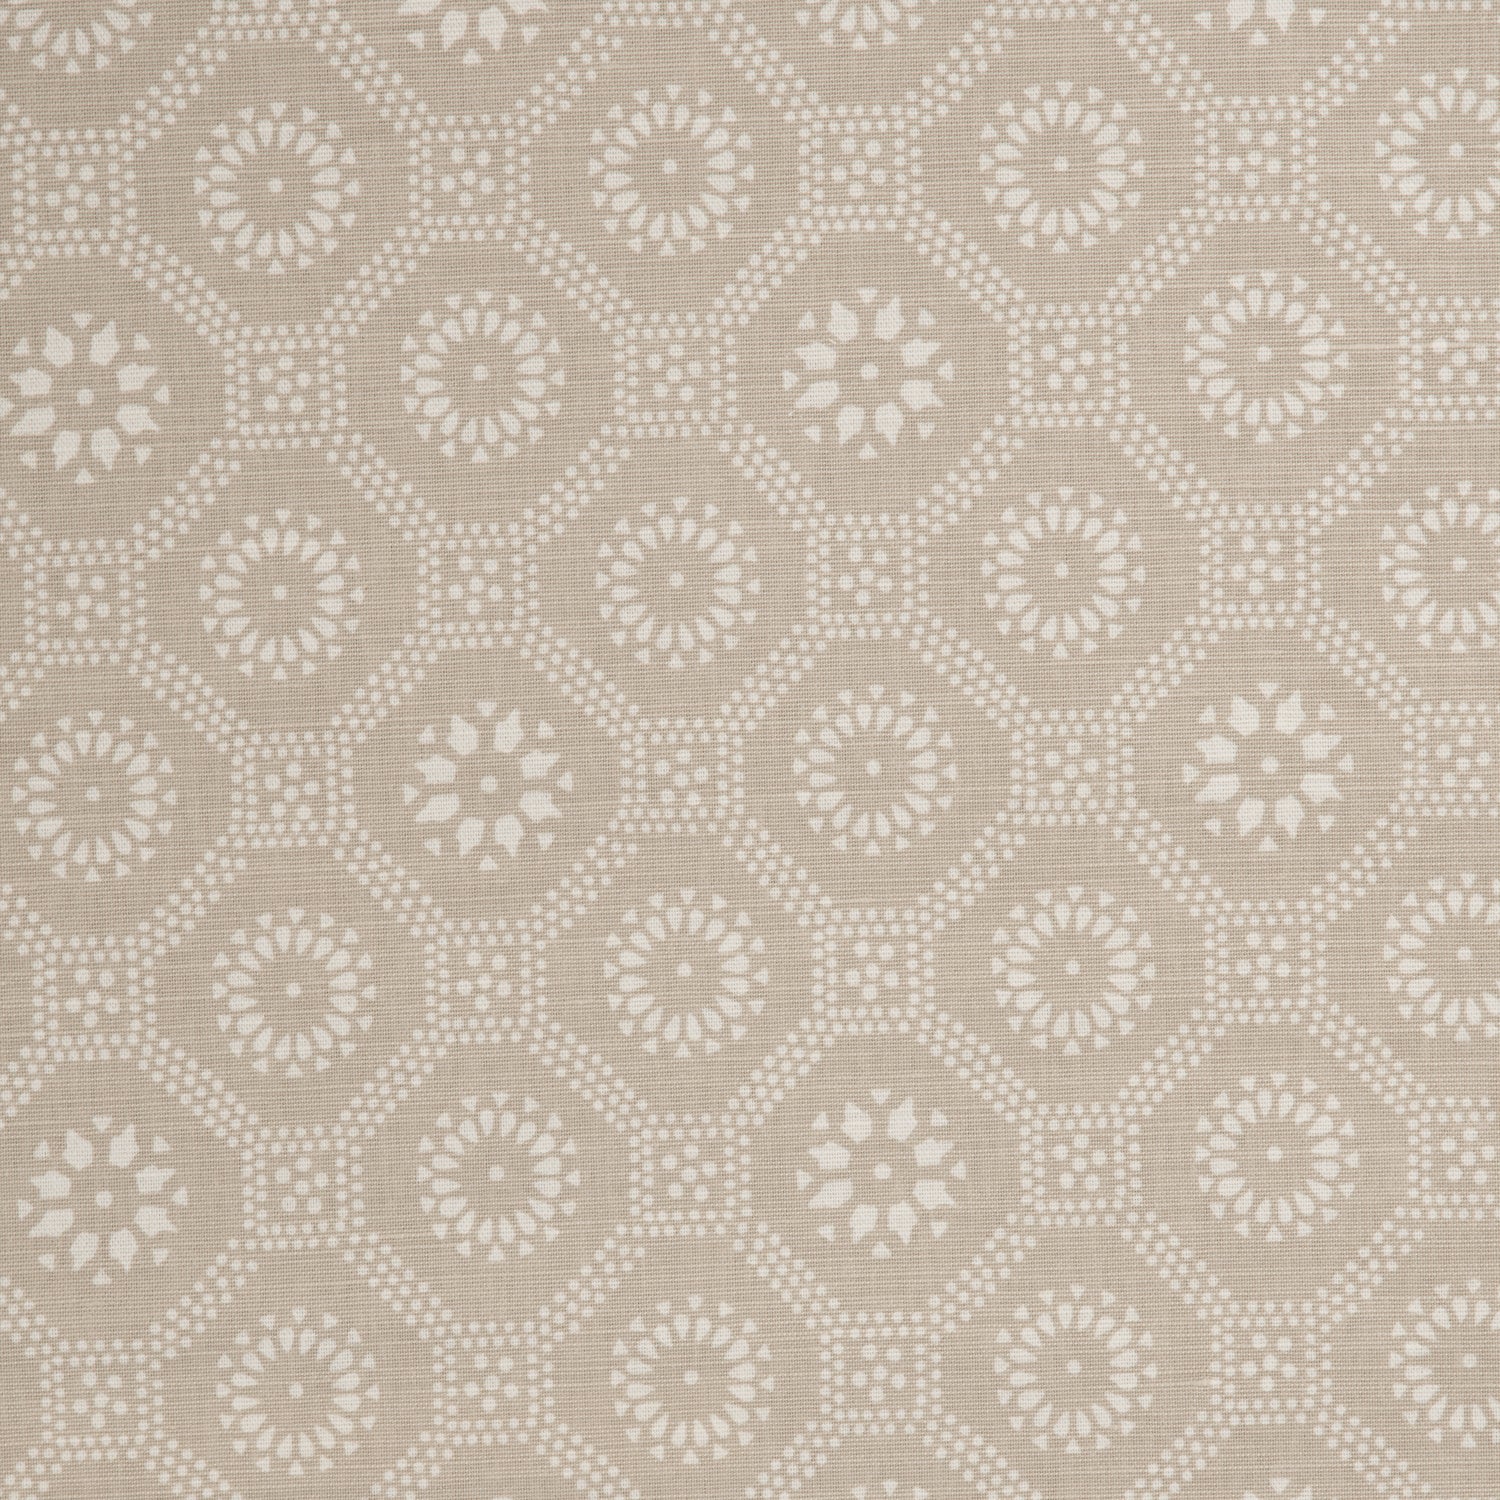 Detail of a cotton fabric in a floral gridded honeycomb pattern in white on a beige field.